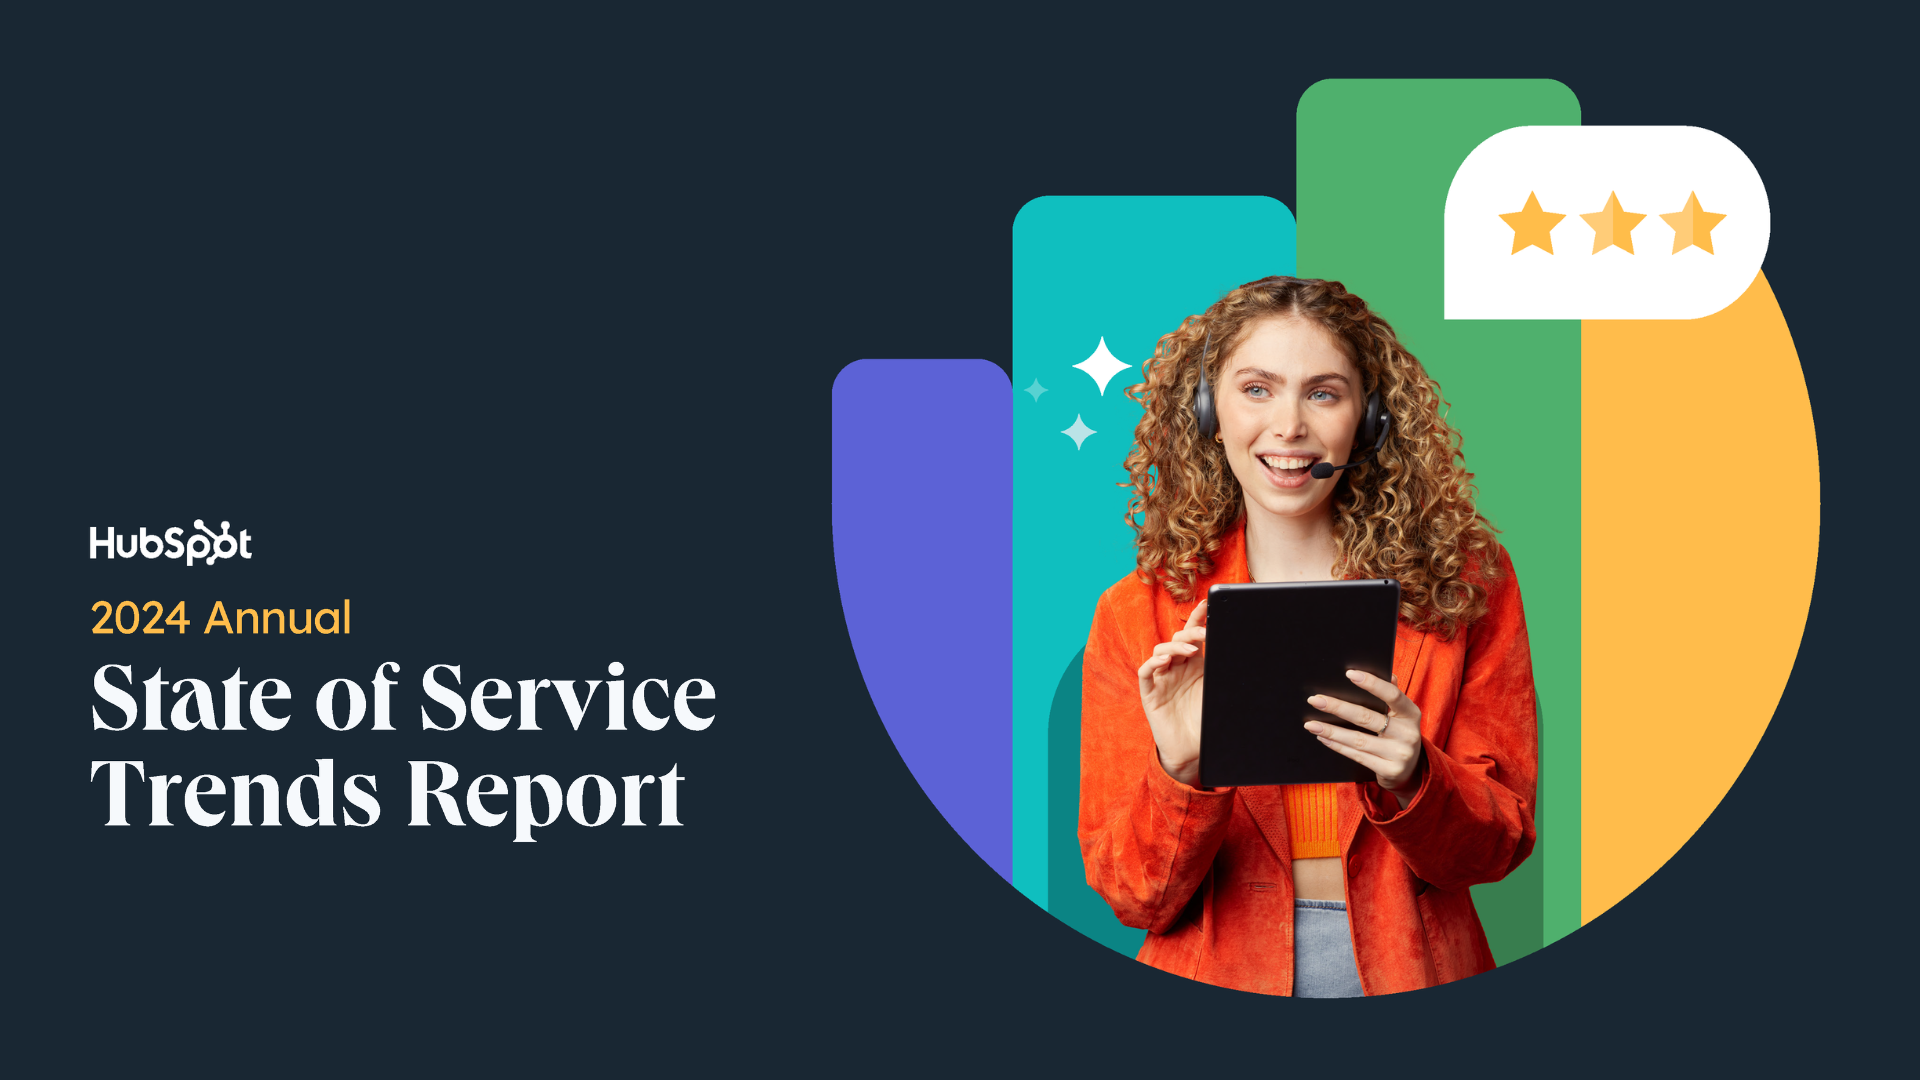 HubSpot State of Service Report 2024: The new playbook for modern CX leaders